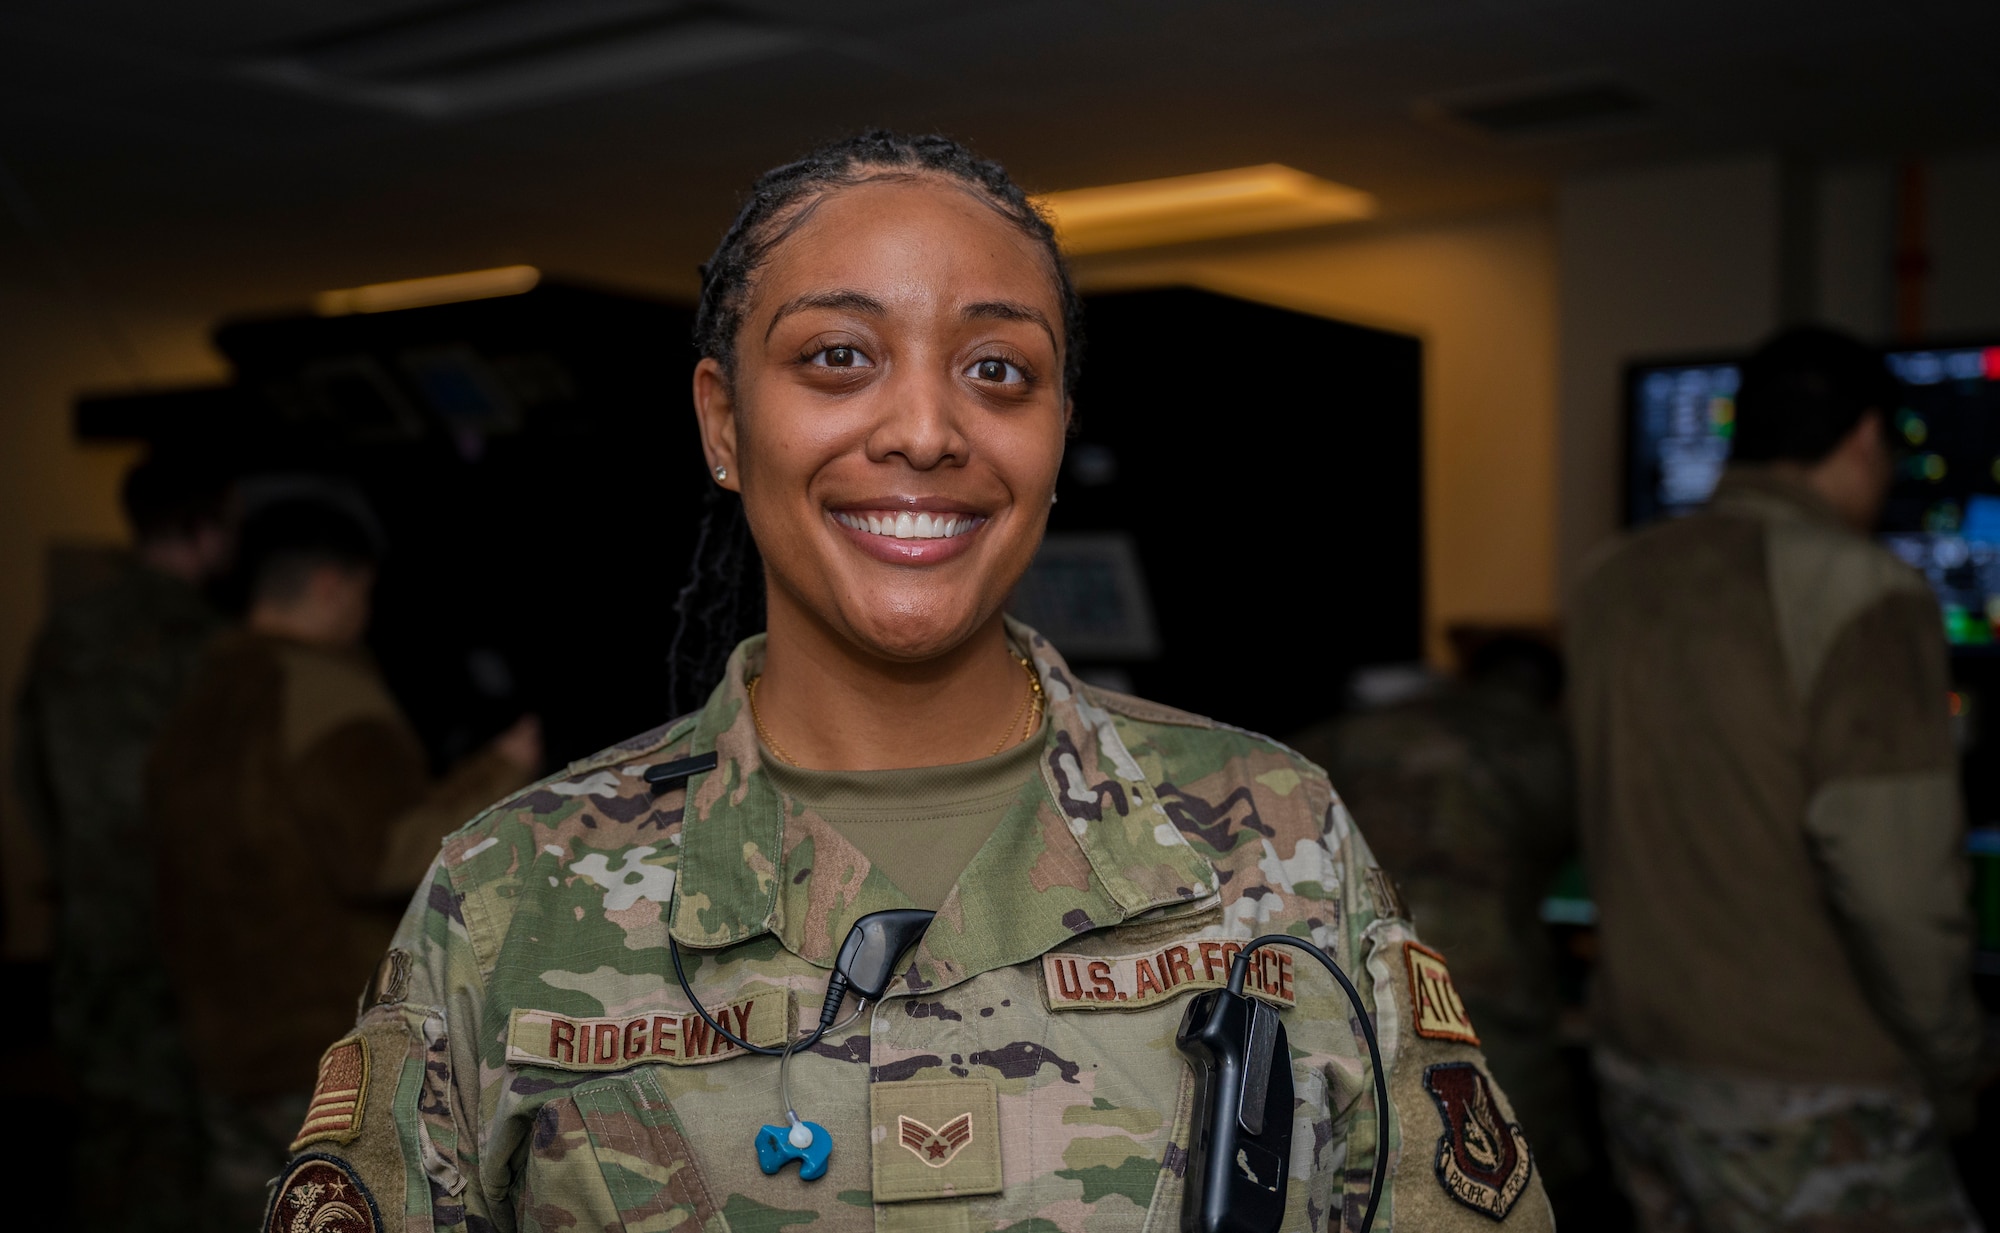 U.S. Air Force Senior Airman Ashley Ridgeway, 51st Operations Support Squadron air traffic control specialist, poses for a photo in celebration of Black History Month at Osan Air Base, Republic of Korea, Jan. 25, 2023.